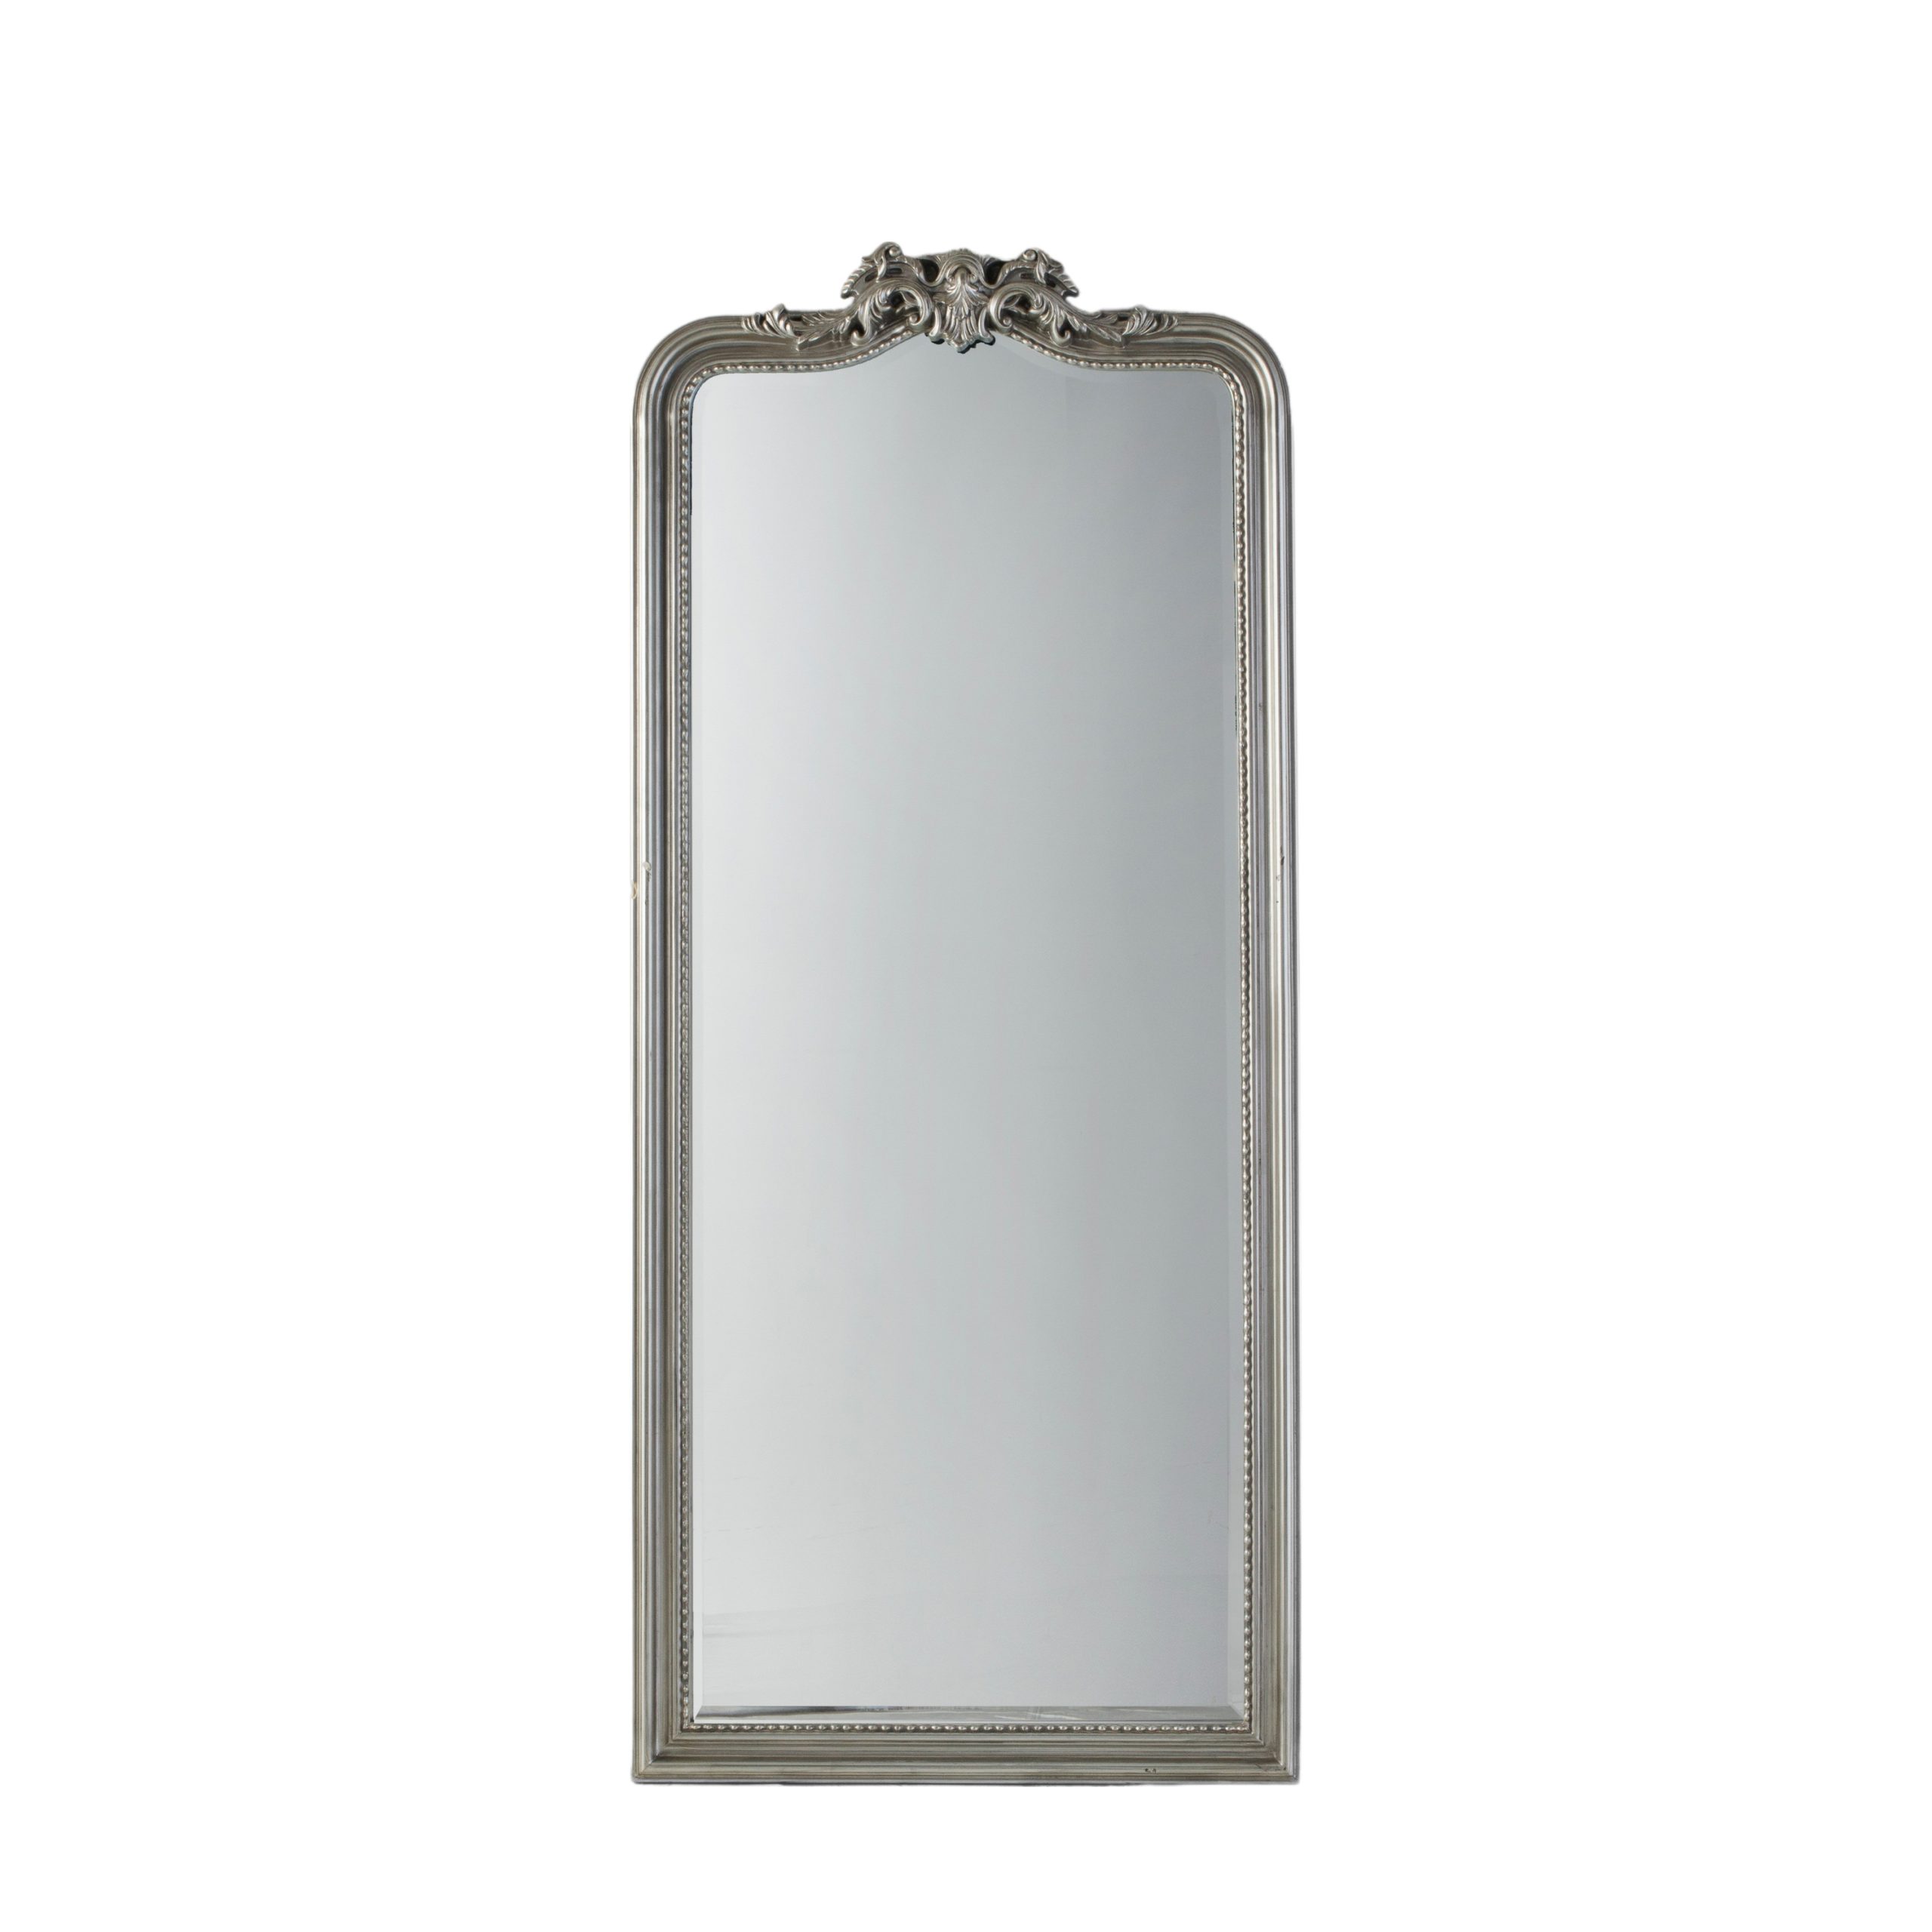 Gallery Direct Cagney Mirror Silver | Shackletons